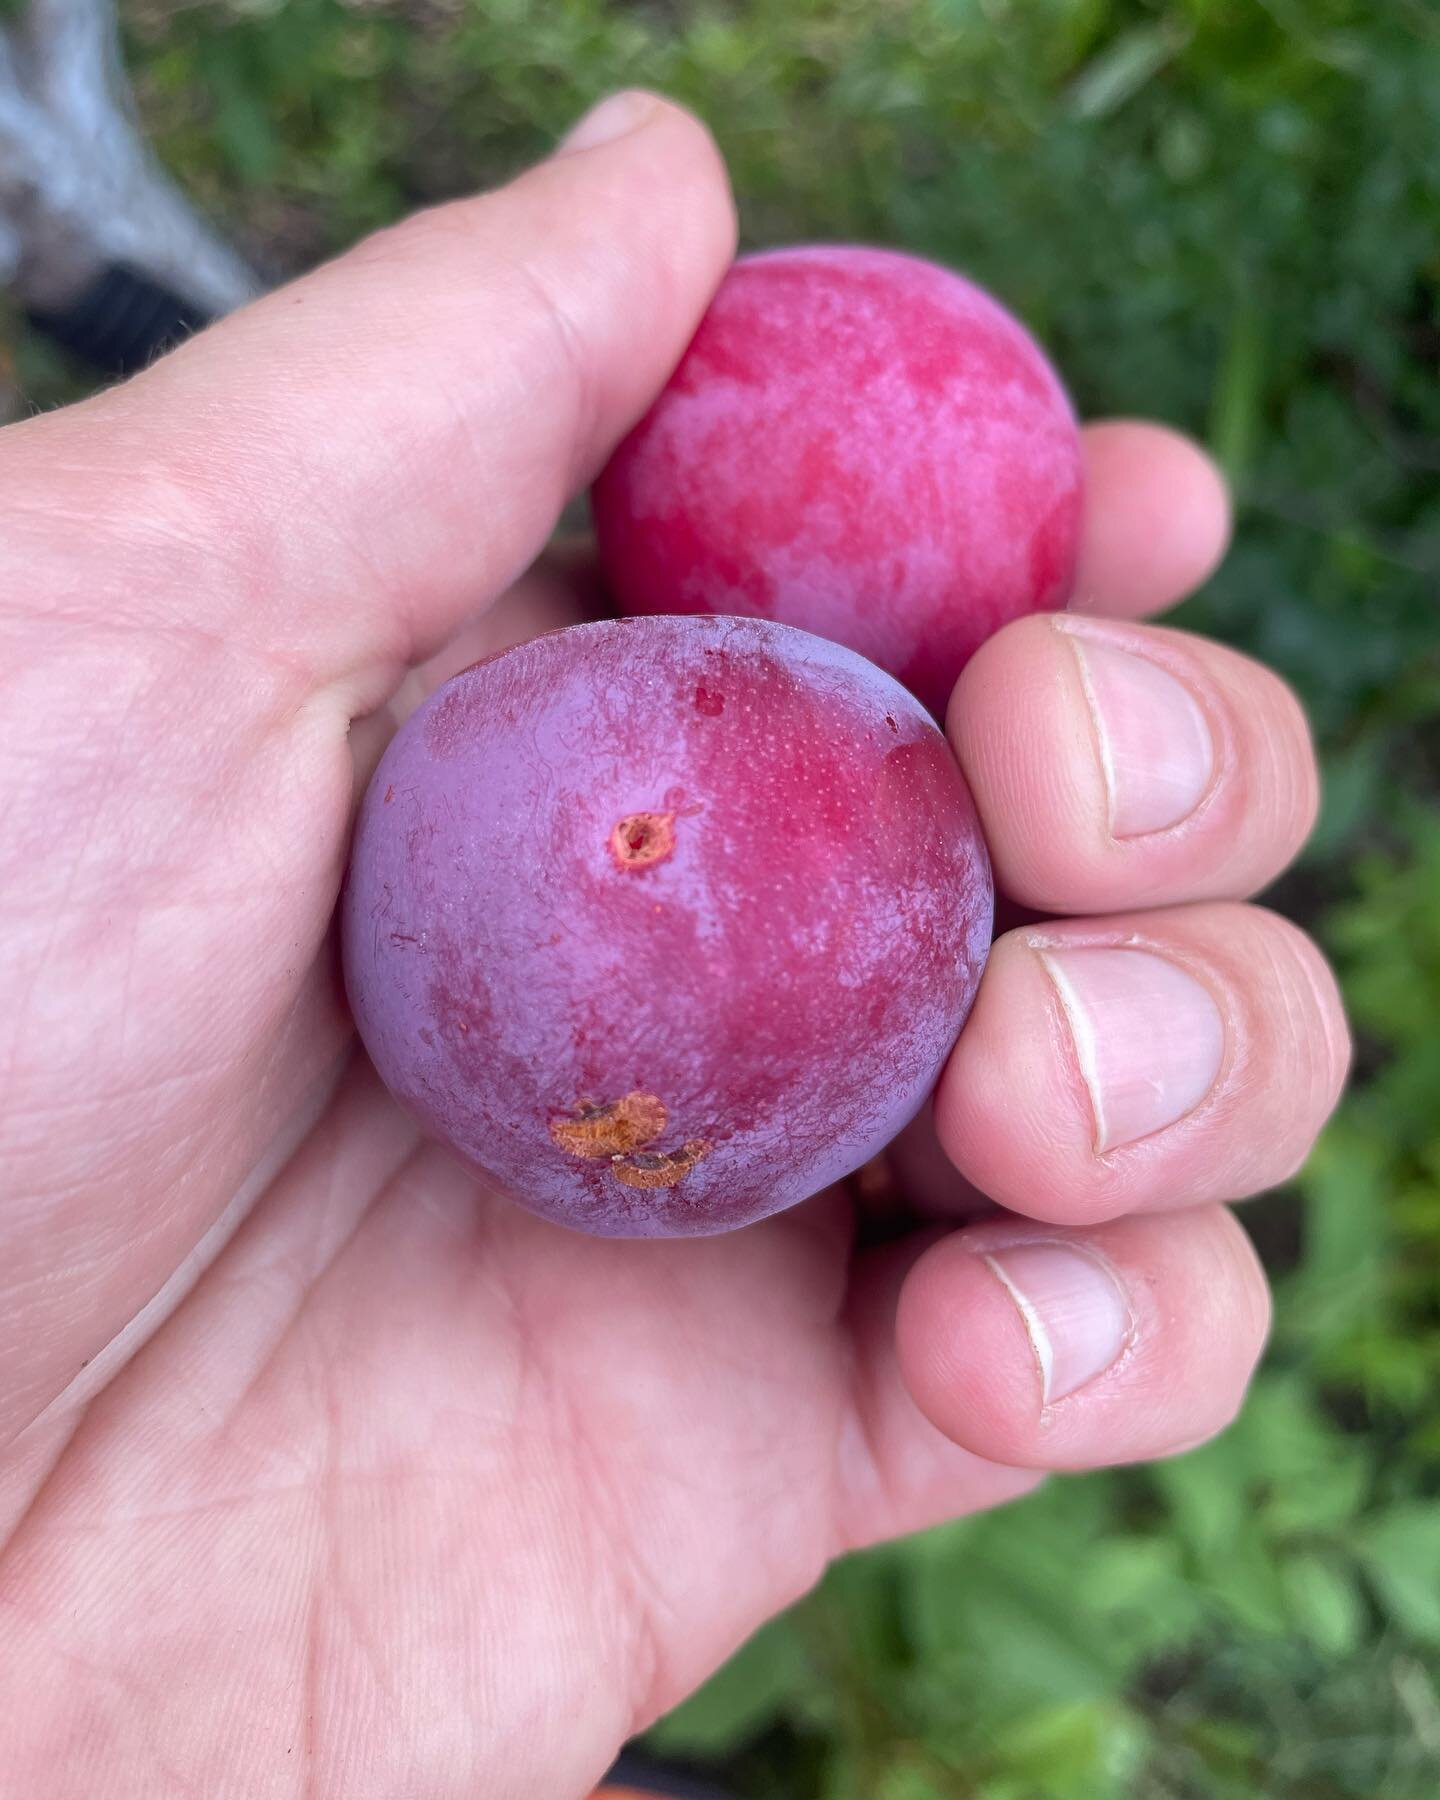 👏BIG👏PLUM👏ENERGY👏

Oh baby do we have plums this year. It&rsquo;s exciting!!!!! Bring us more!!!

Couple different varieties pictured here. We&rsquo;ve been foraging a lot for wild plums (the lil ones), but it looks like Winnipeg&rsquo;s backyard